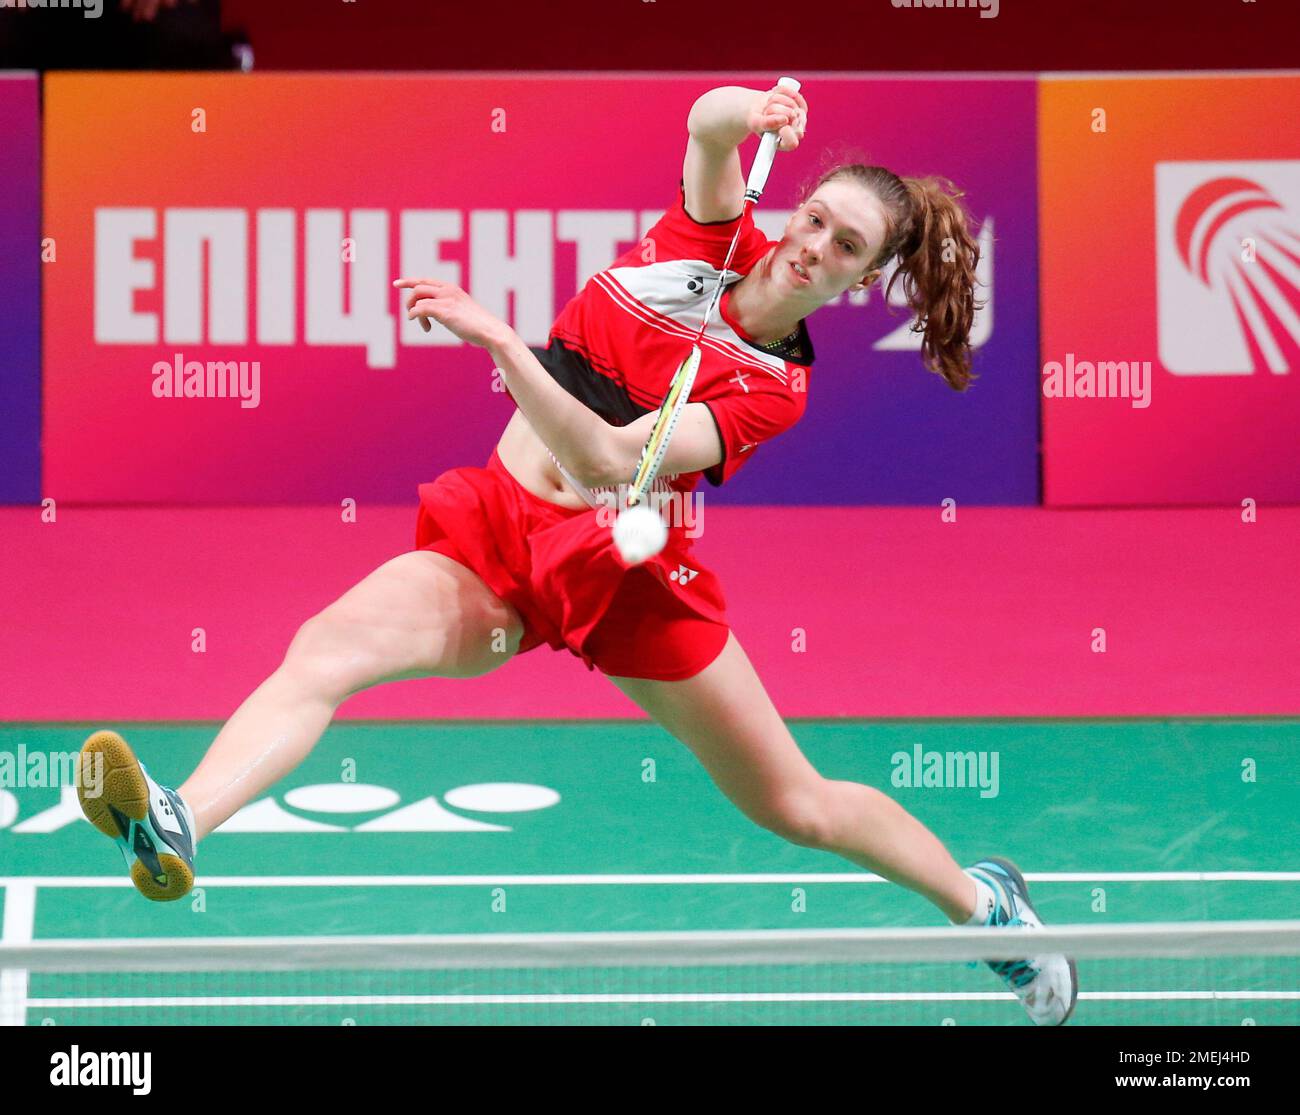 Dare indsats Fordeling Line Christophersen of Denmark compete against Carolina Marin of Spain  during the single women's final match at the European Badminton  Championships in Kyiv, Ukraine, Sunday, May 2, 2021. Line Christophersen  won the